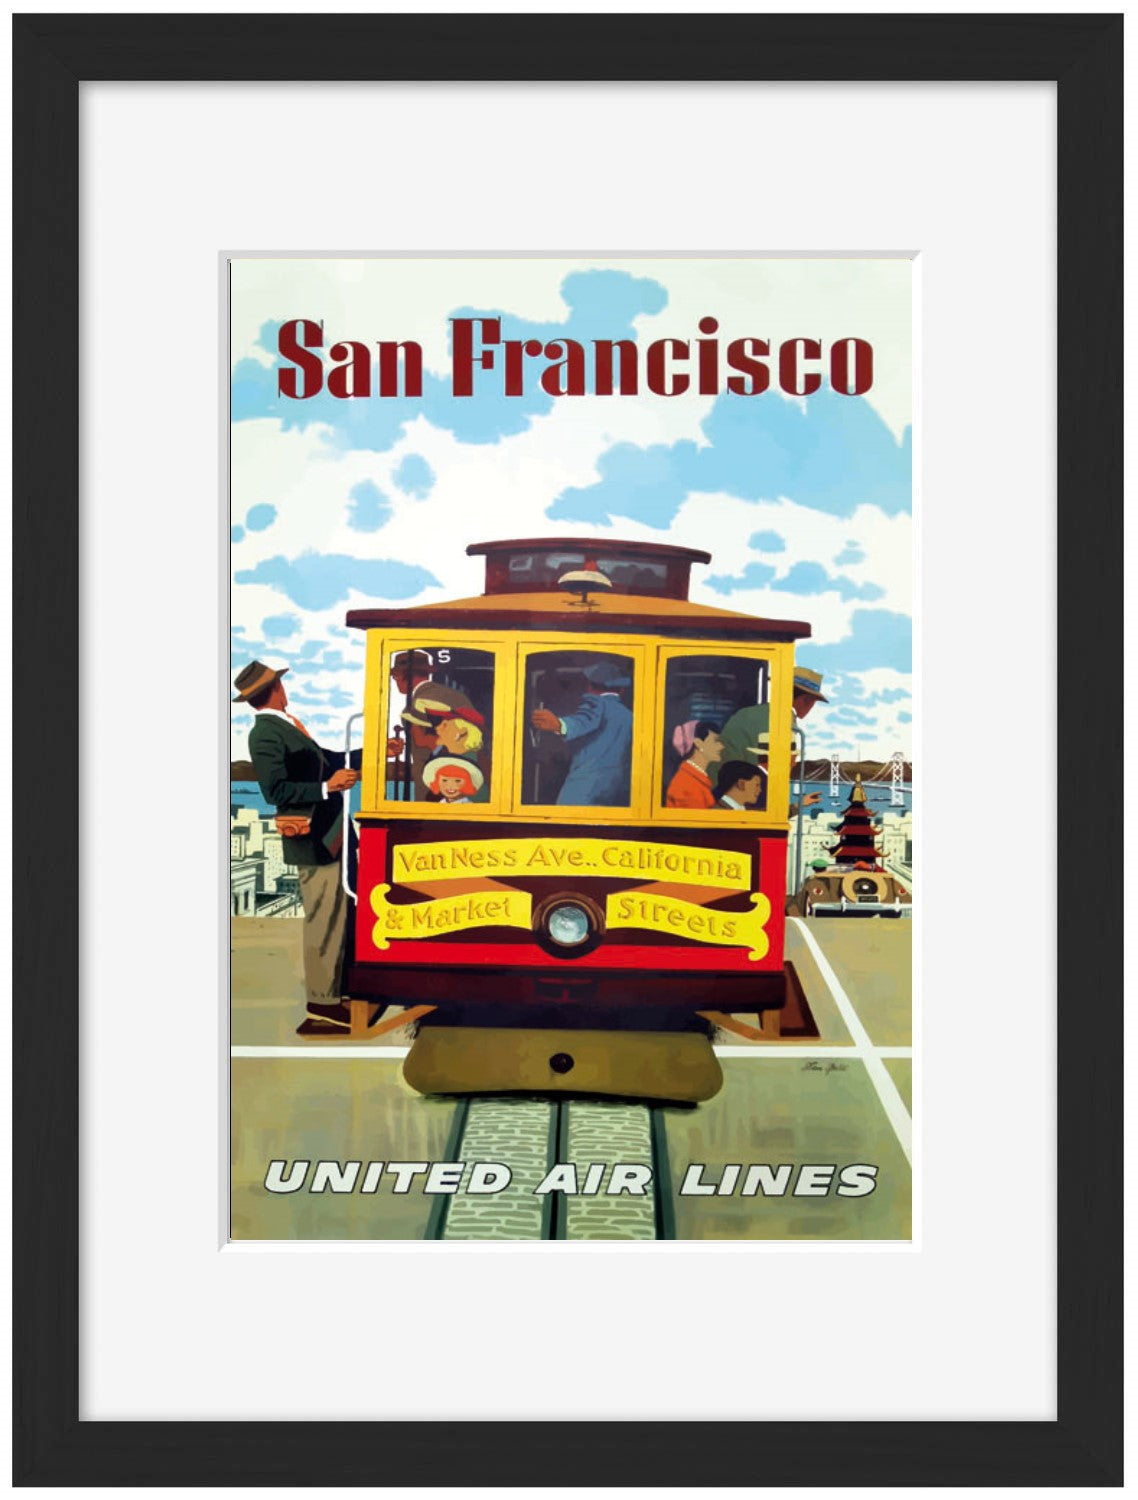 San Francisco United Airlines (Tramway)-airlines, print-Framed Print-30 x 40 cm-BLUE SHAKER